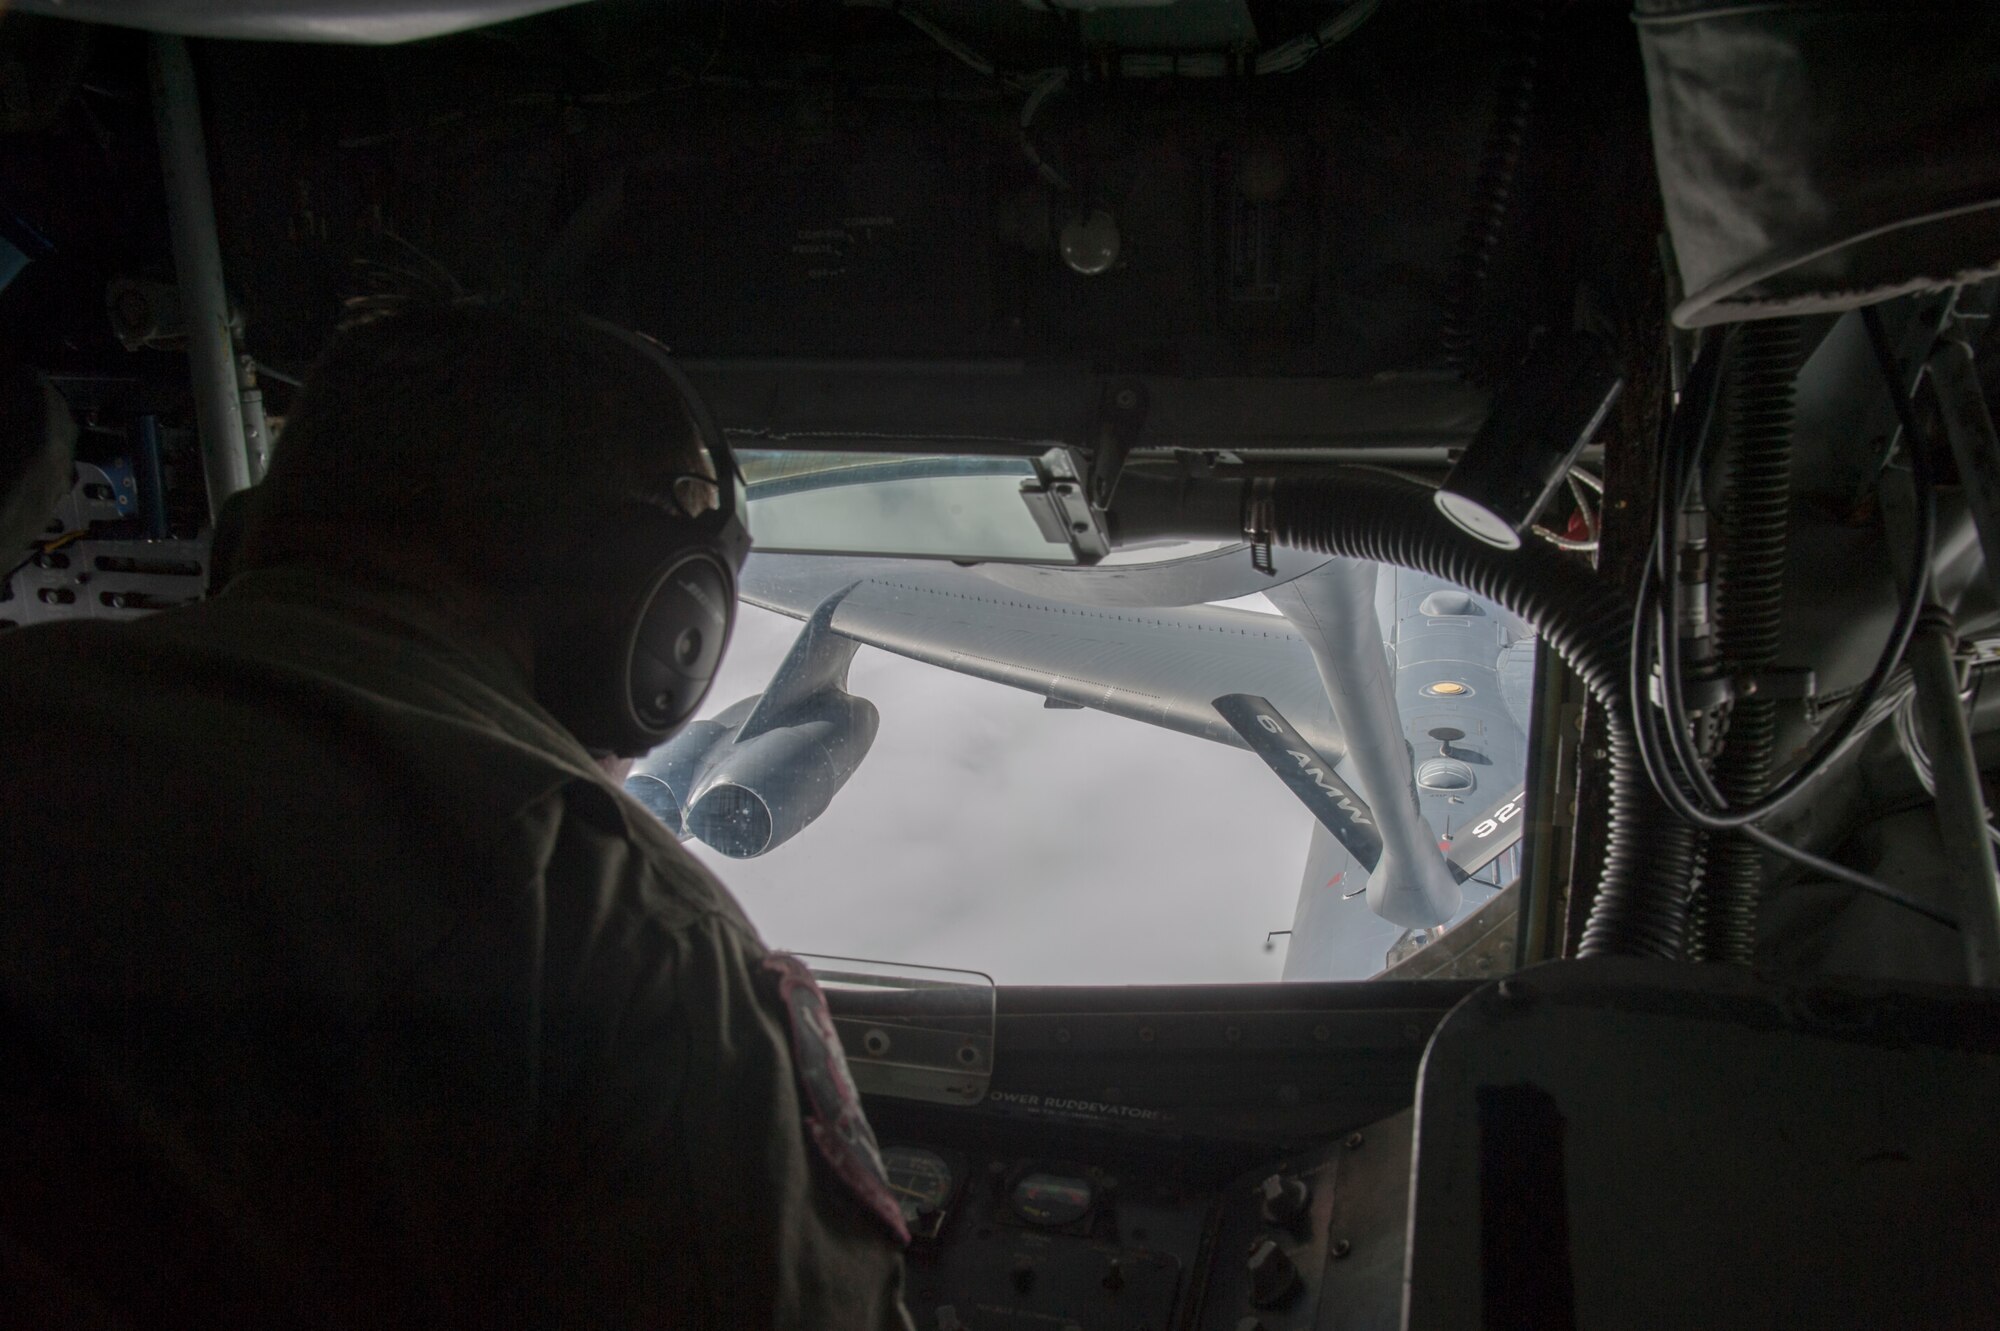 U.S. Air Force Senior Master Sgt. Phillip Costine, a 63rd Air Refueling Squadron evaluator boom operator refuels a B-52 Stratofortress, Nov. 4, 2019. The KC-135 crew from MacDill Air Force Base, Fla., delivered air refueling support to bolster the global strike capabilities of the B-52 assigned to Barksdale AFB, La.